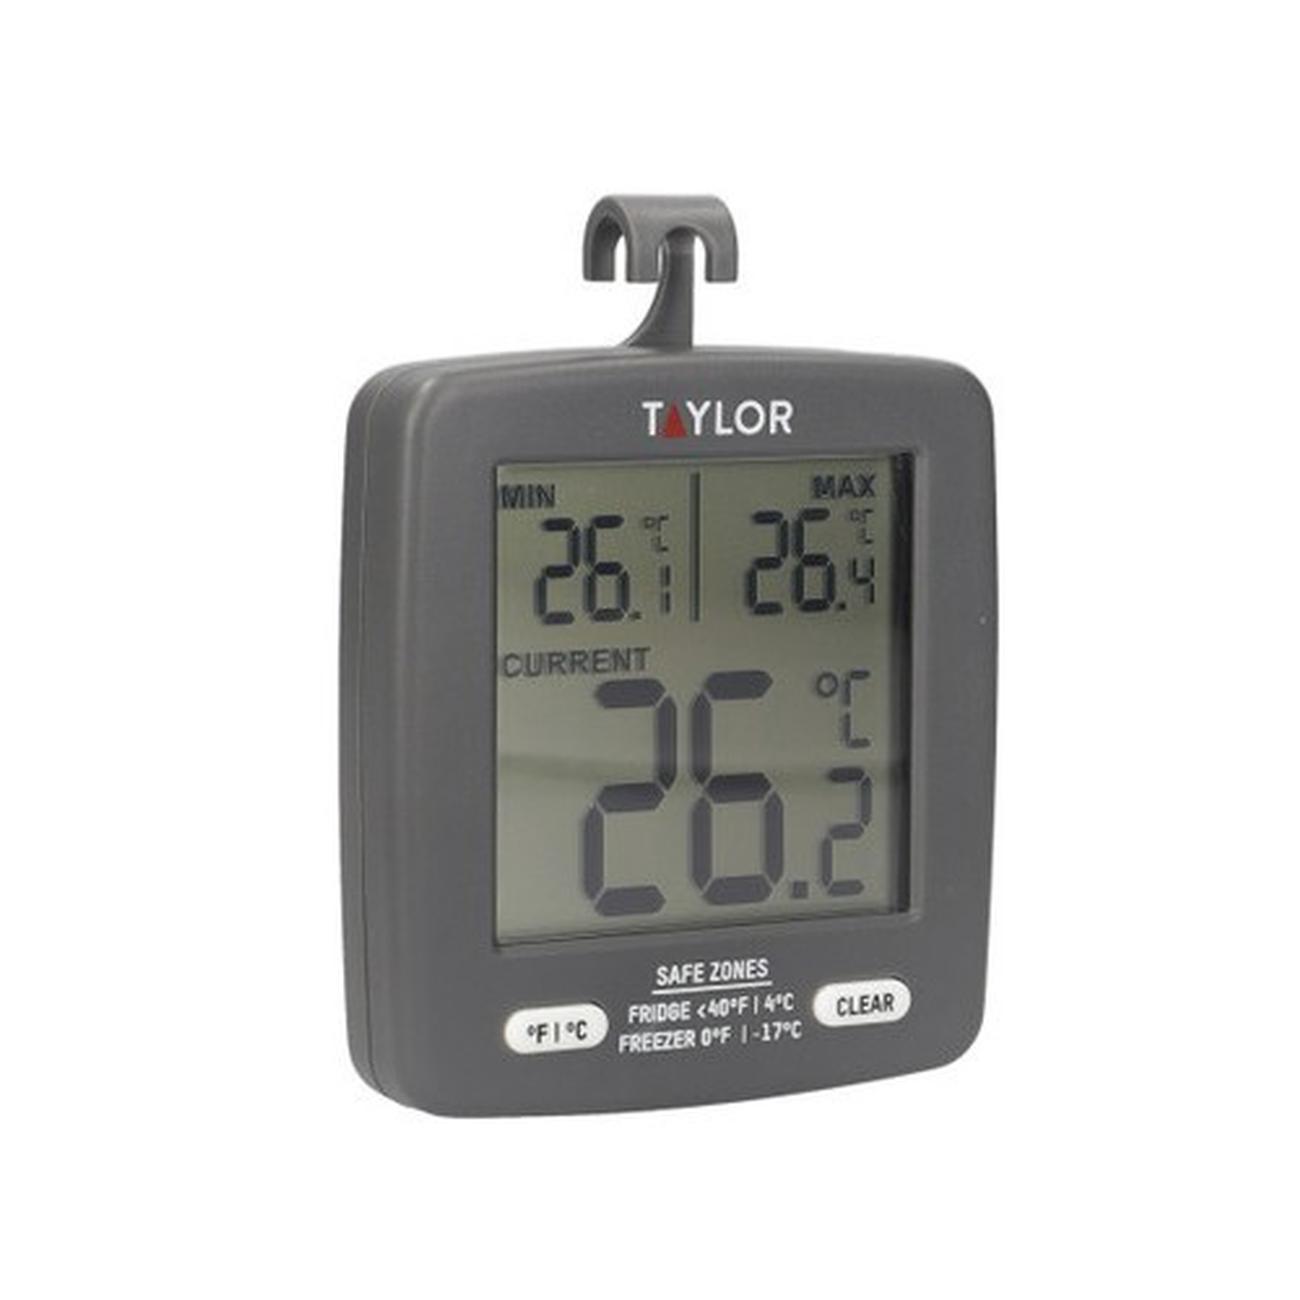 CDN PRO ACCURATE HIGH HEAT OVEN THERMOMETER NSF STANDING - Eddingtons